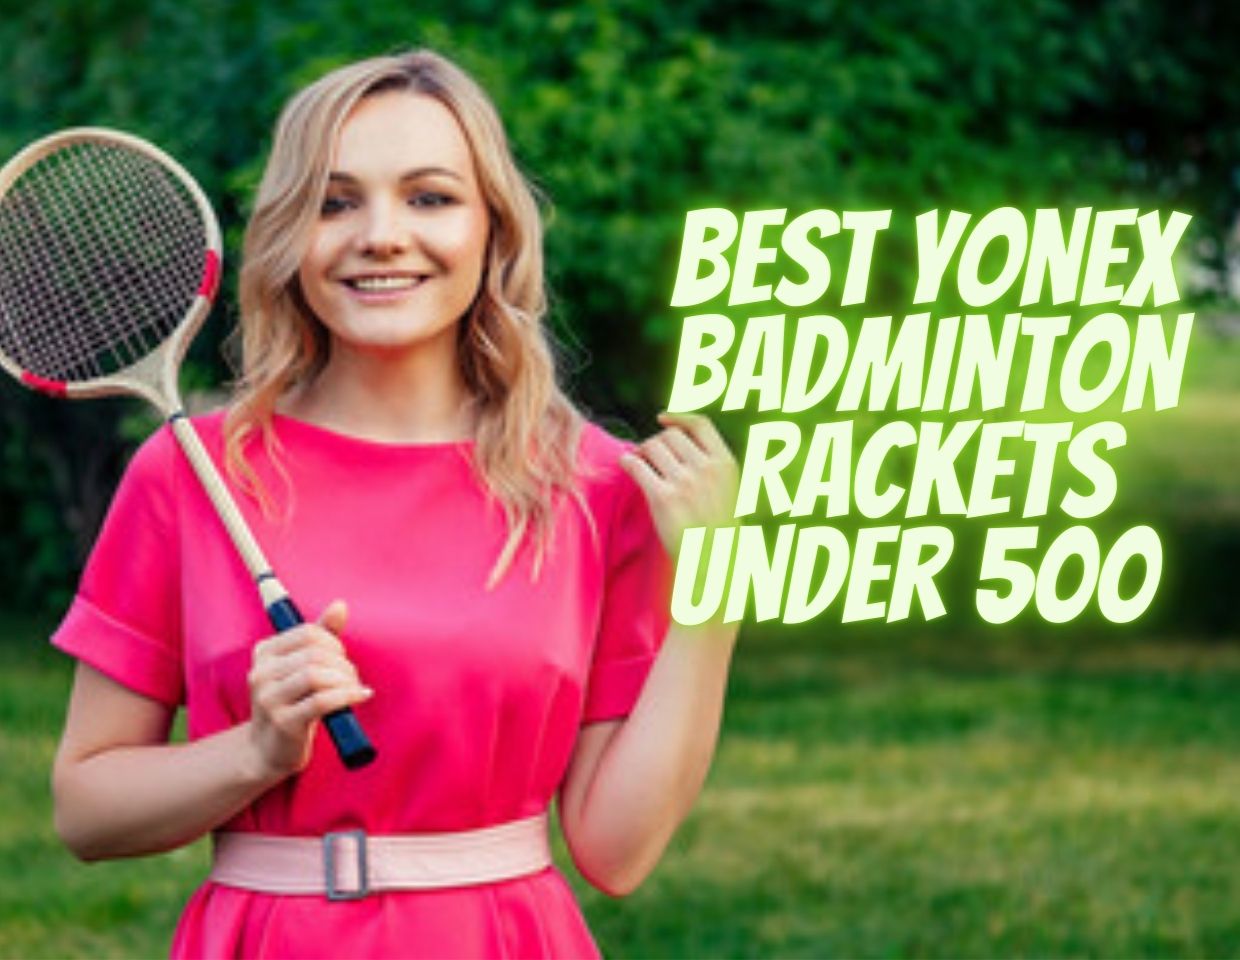 Best Yonex Badminton Rackets Under 500 |Reviews |Buying Guide